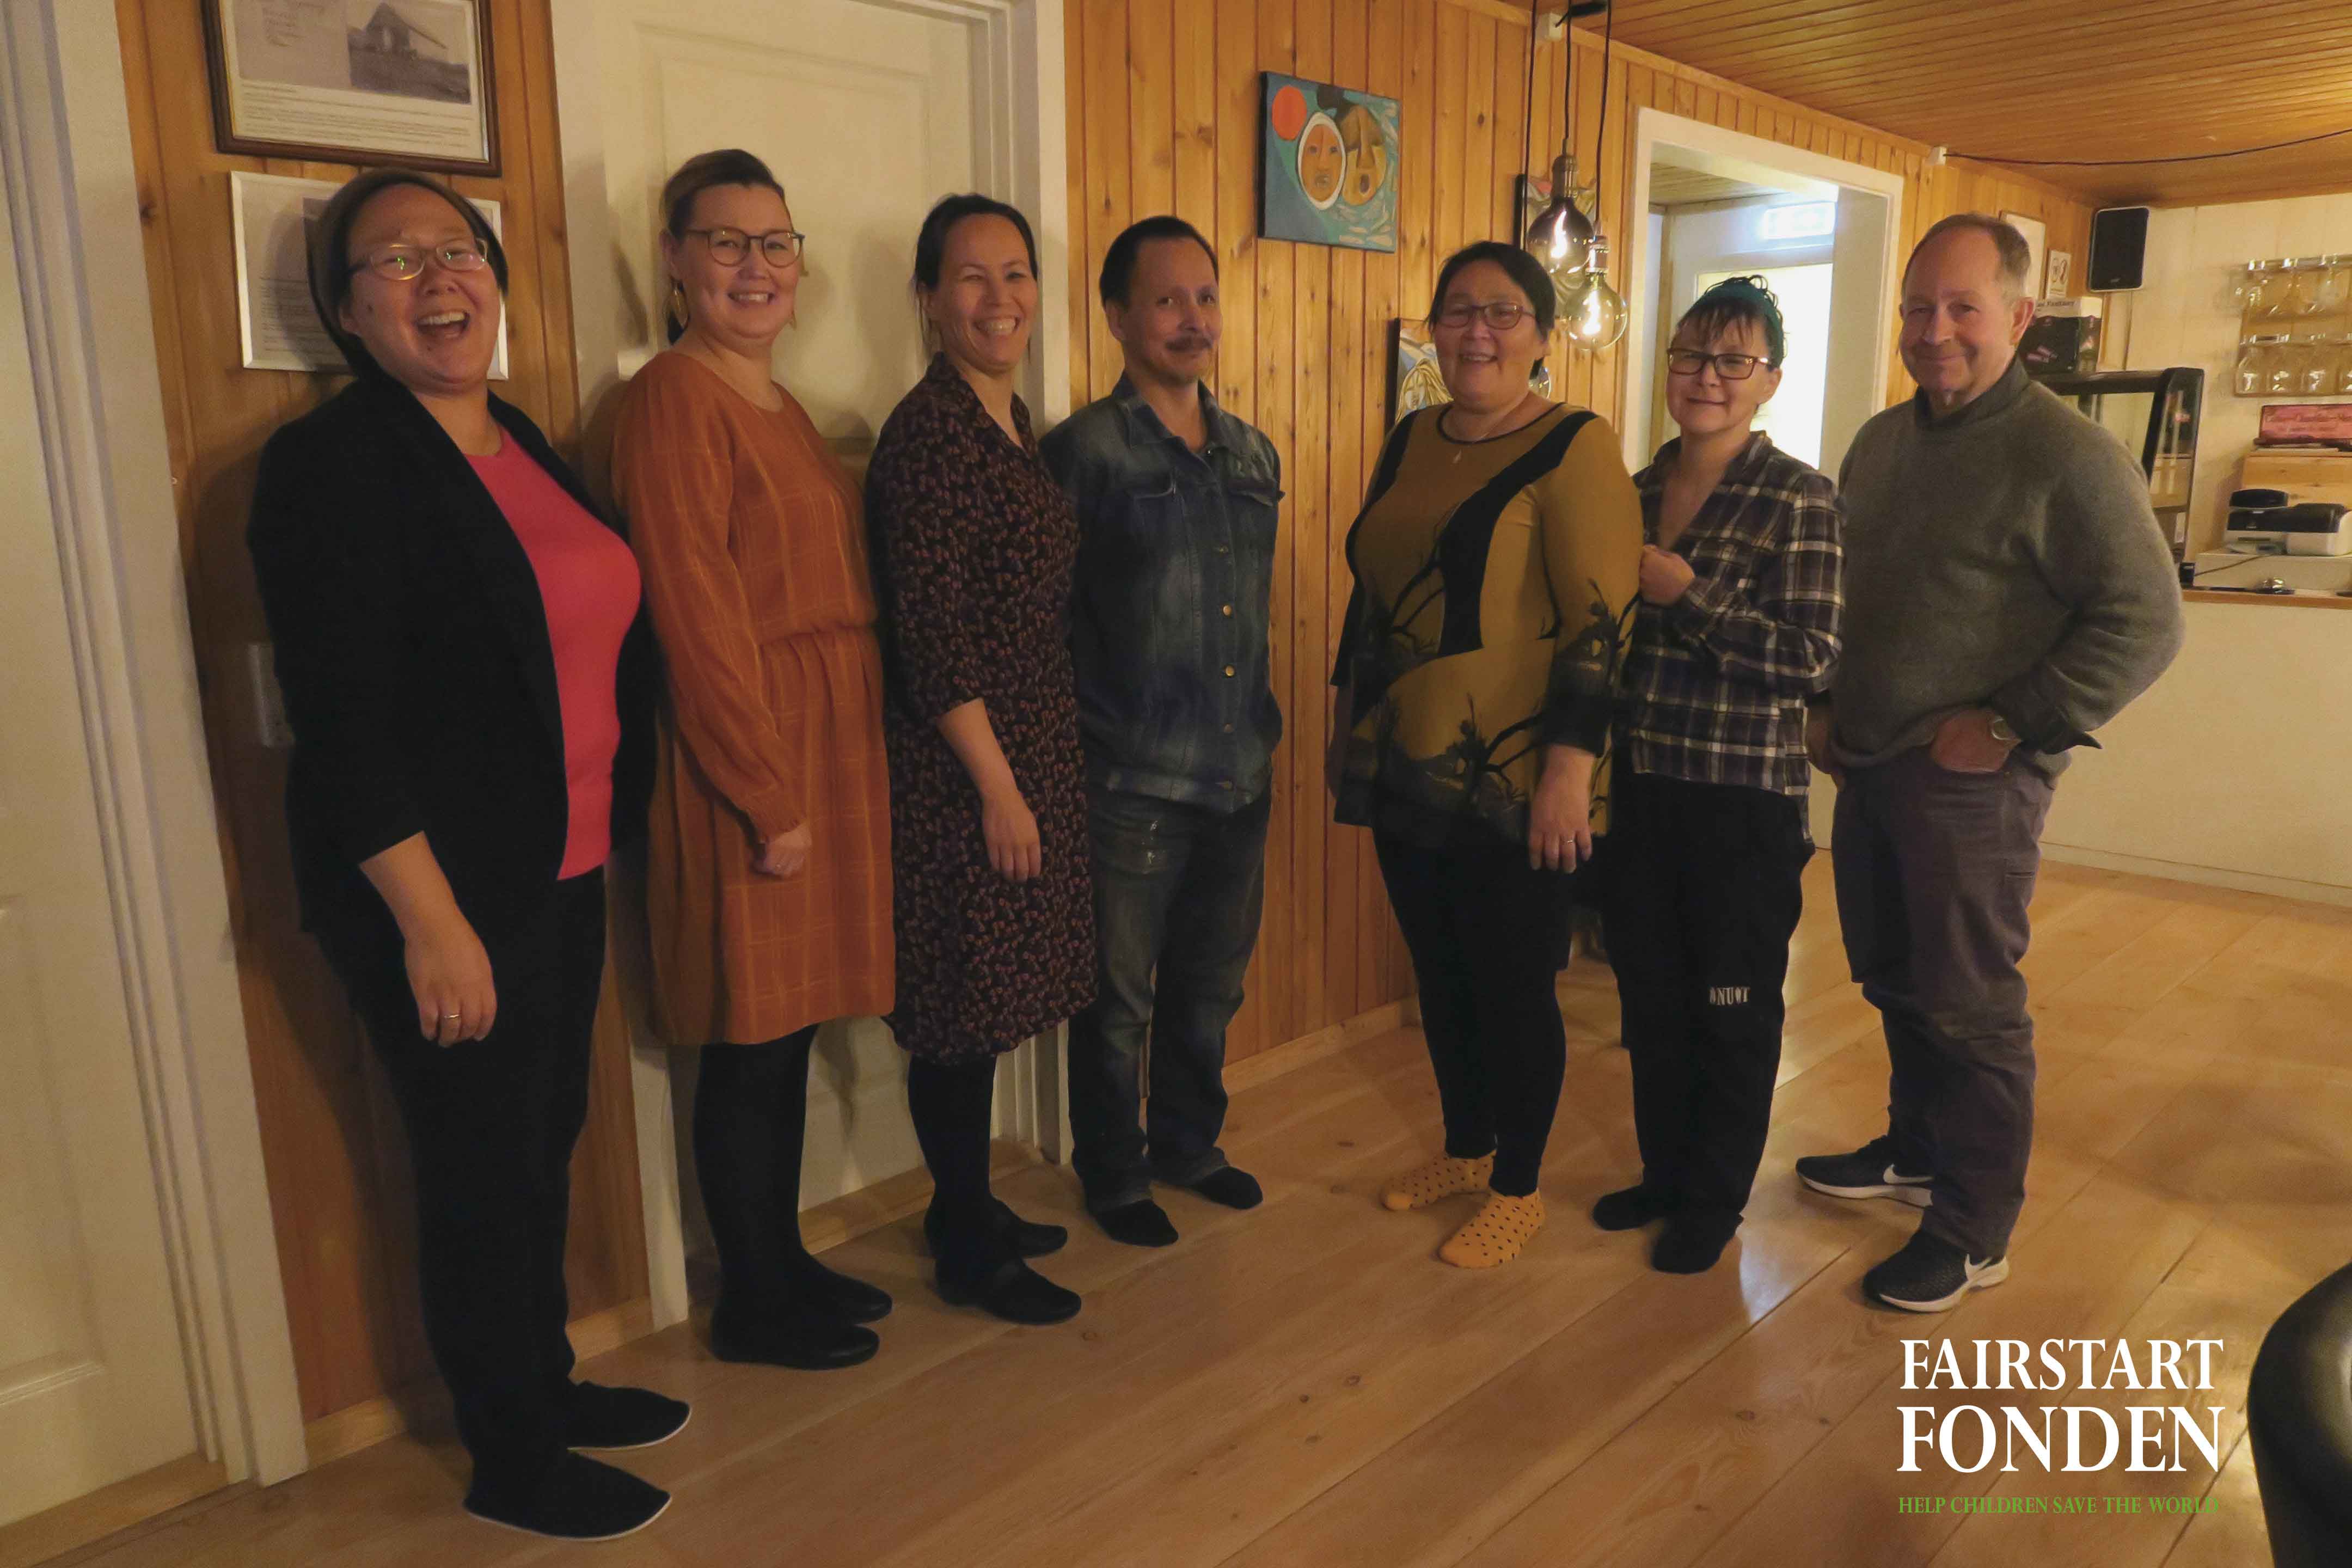 2020 BEGINS WITH A JOYFUL REUNION WITH OUR SKILLED FAIRSTART INSTRUCTORS IN UPERNAVIK, GREENLAND 🇬🇱💚